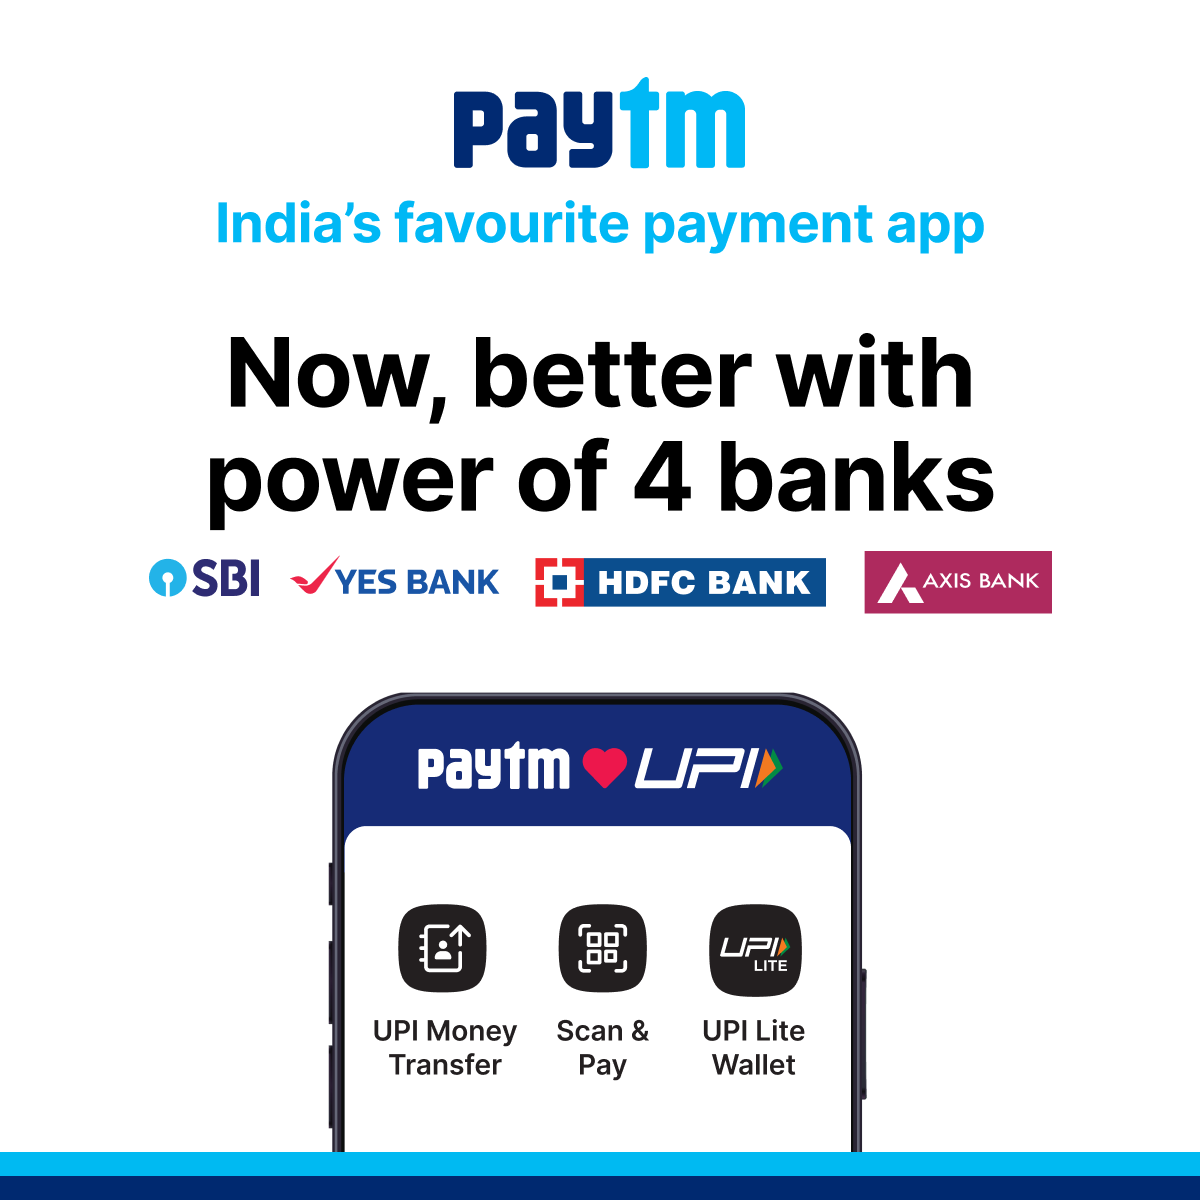 Paytm!🚀 India's favourite payment app. Now, better with power of 4 banks @YESBANK @AxisBank @HDFC_Bank @TheOfficialSBI